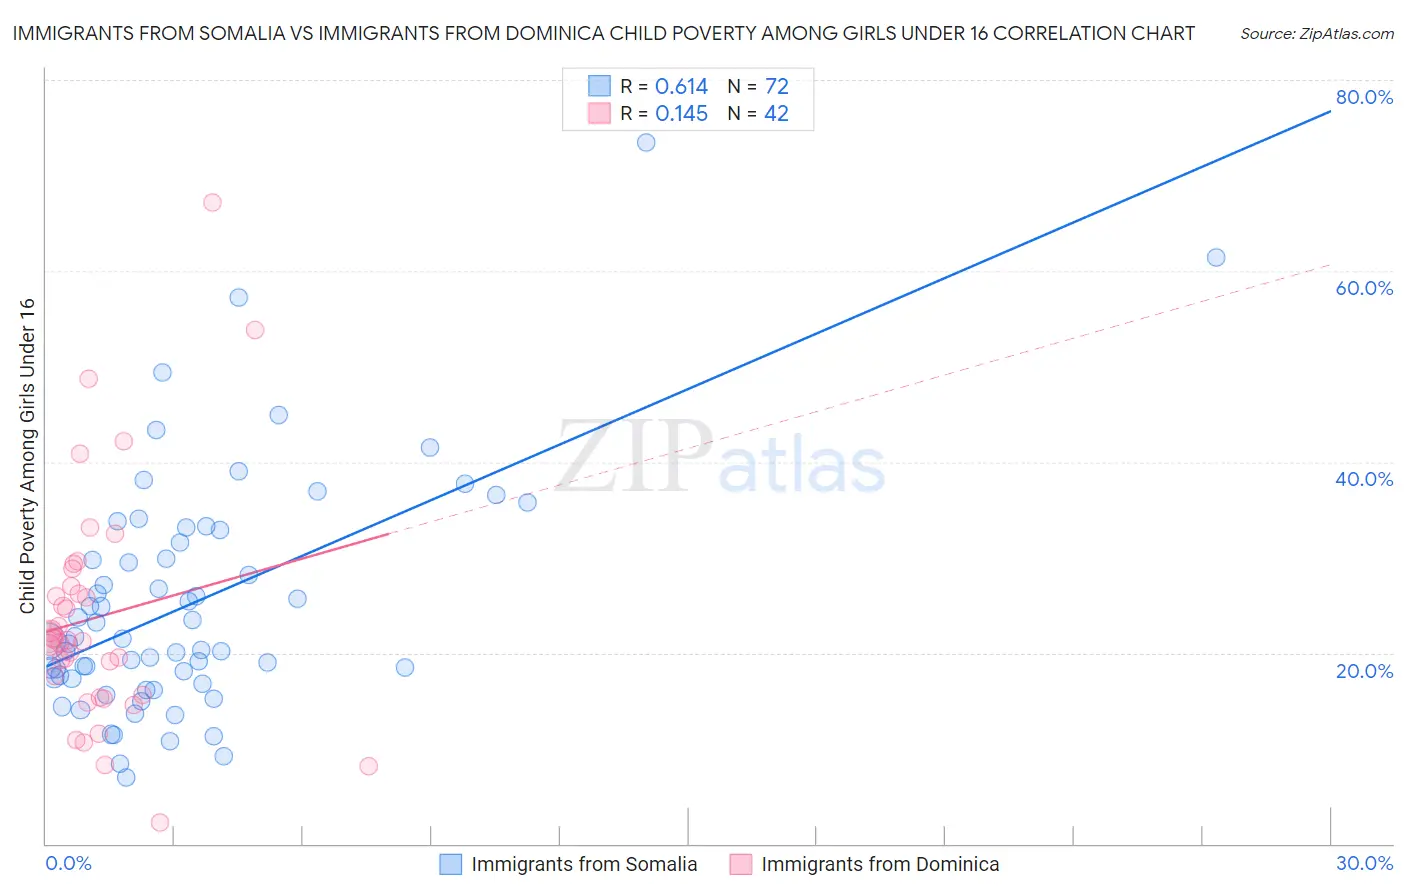 Immigrants from Somalia vs Immigrants from Dominica Child Poverty Among Girls Under 16